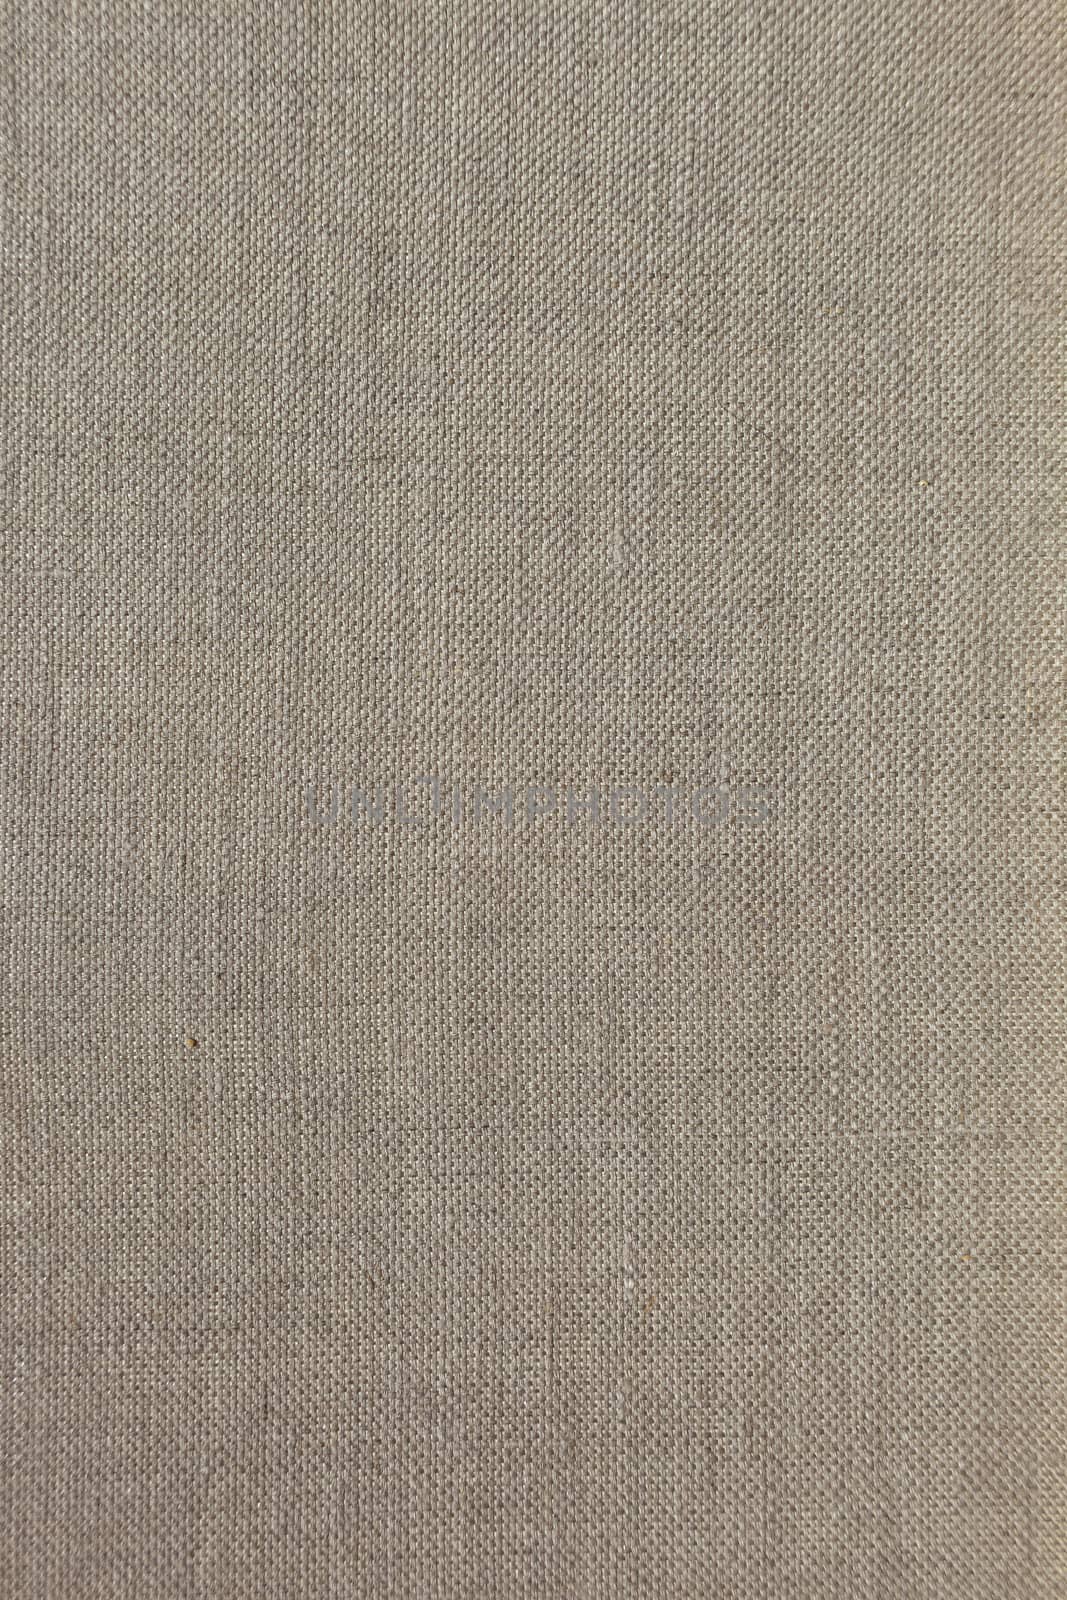 Fine texture of linen canvas fabric background 